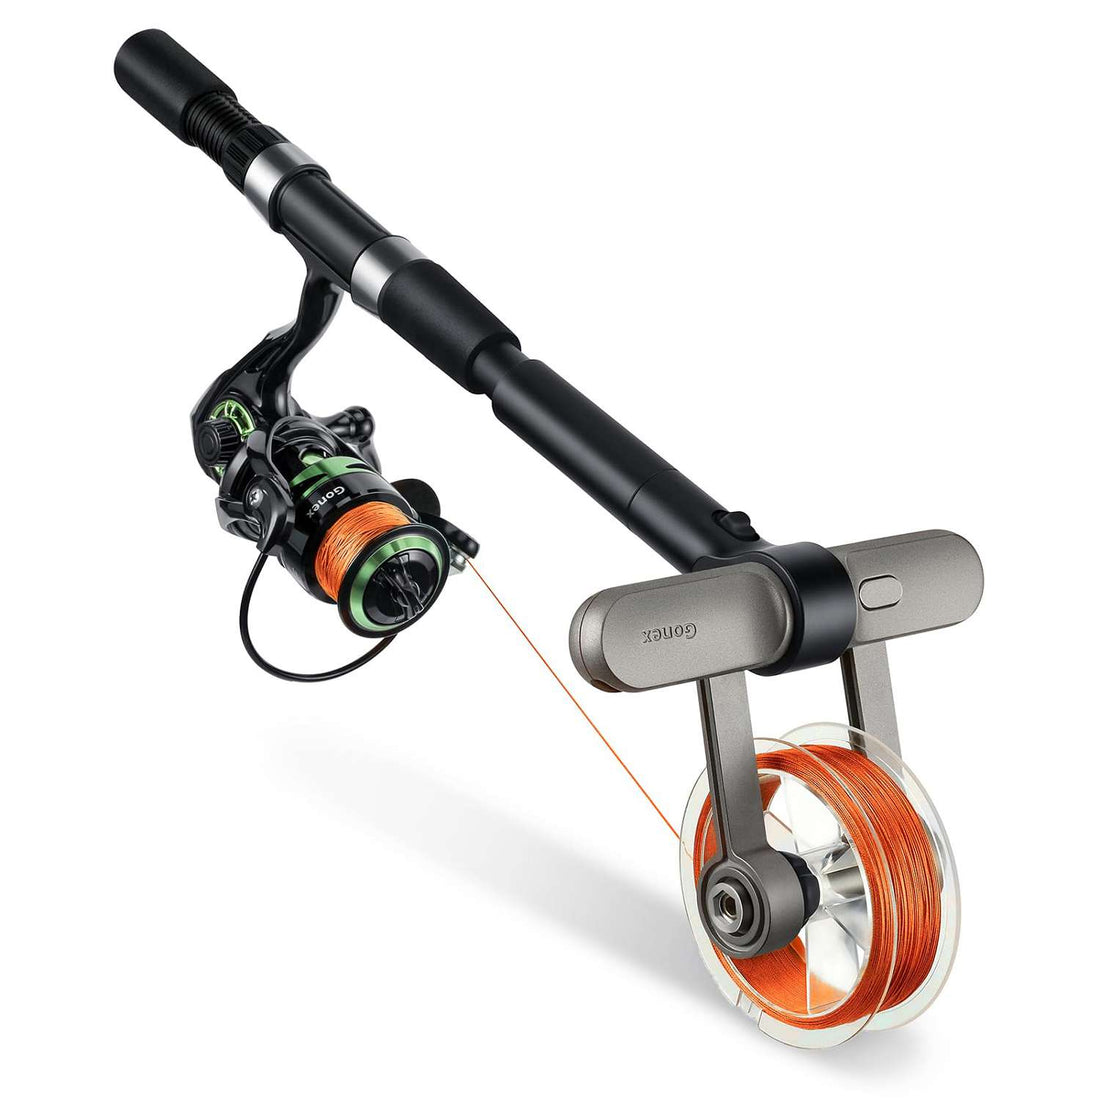 Gonex Fishing Gear for Your Next Fishing Adventure